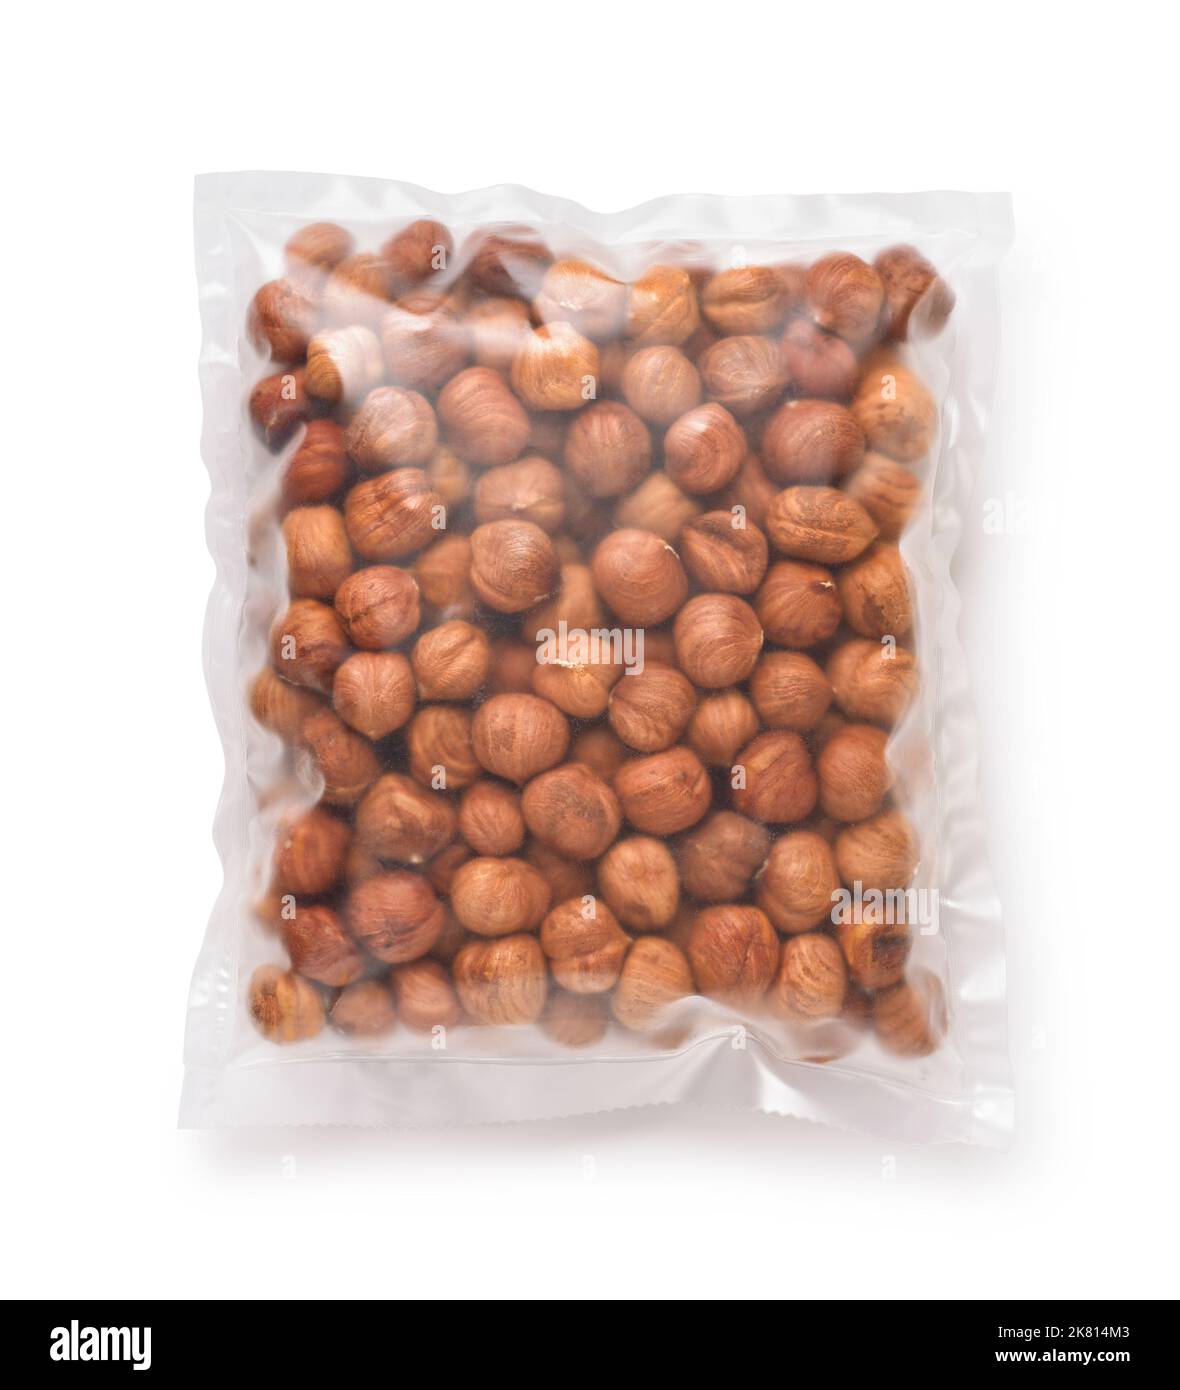 Top view of shelled hazelnuts in transparent plastic bag isolated on white Stock Photo